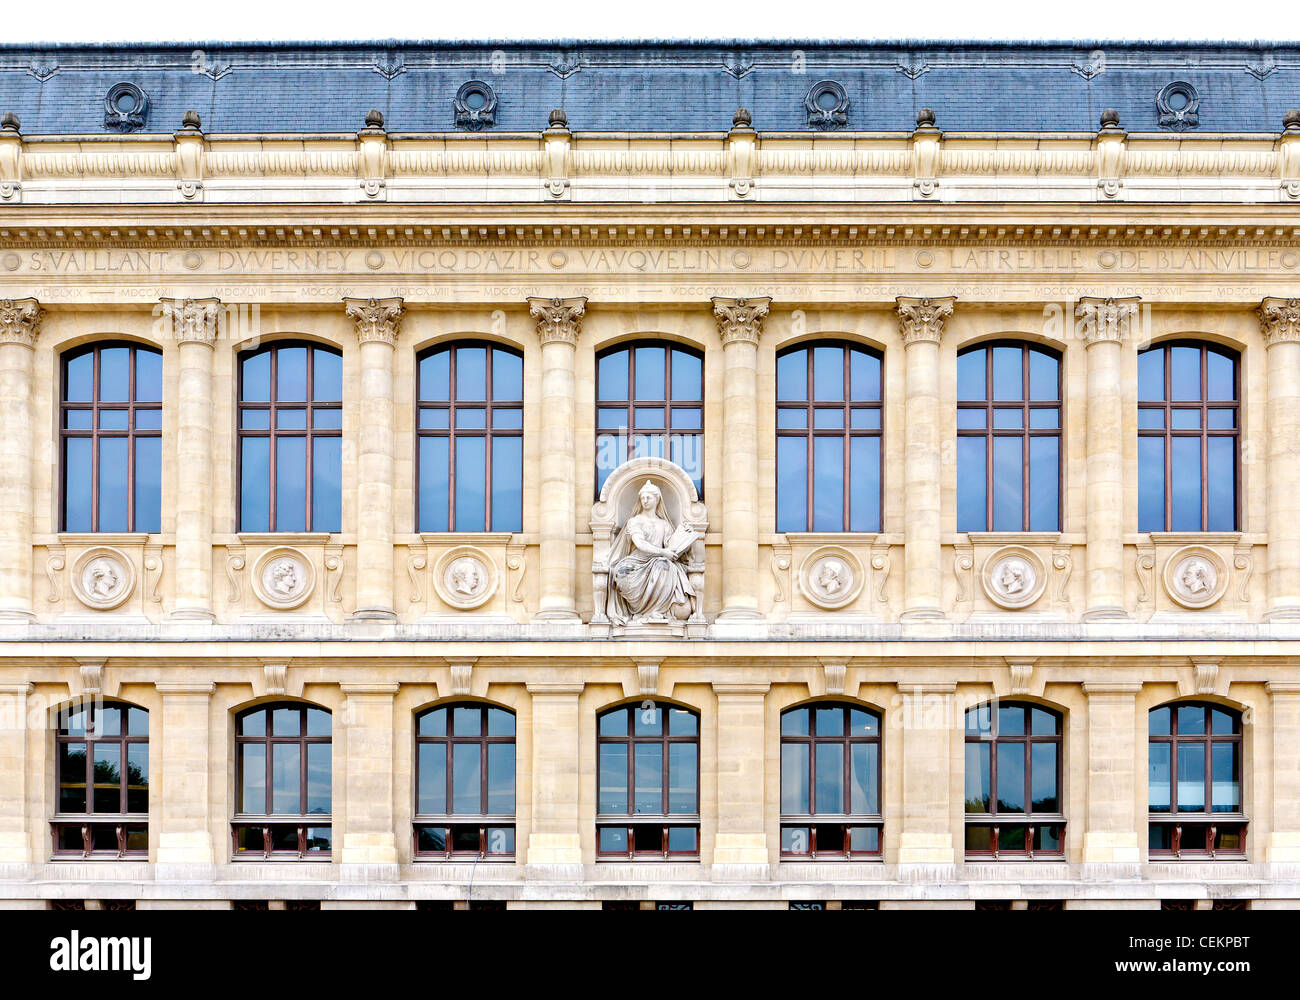 French architecture - old monumental building Stock Photo